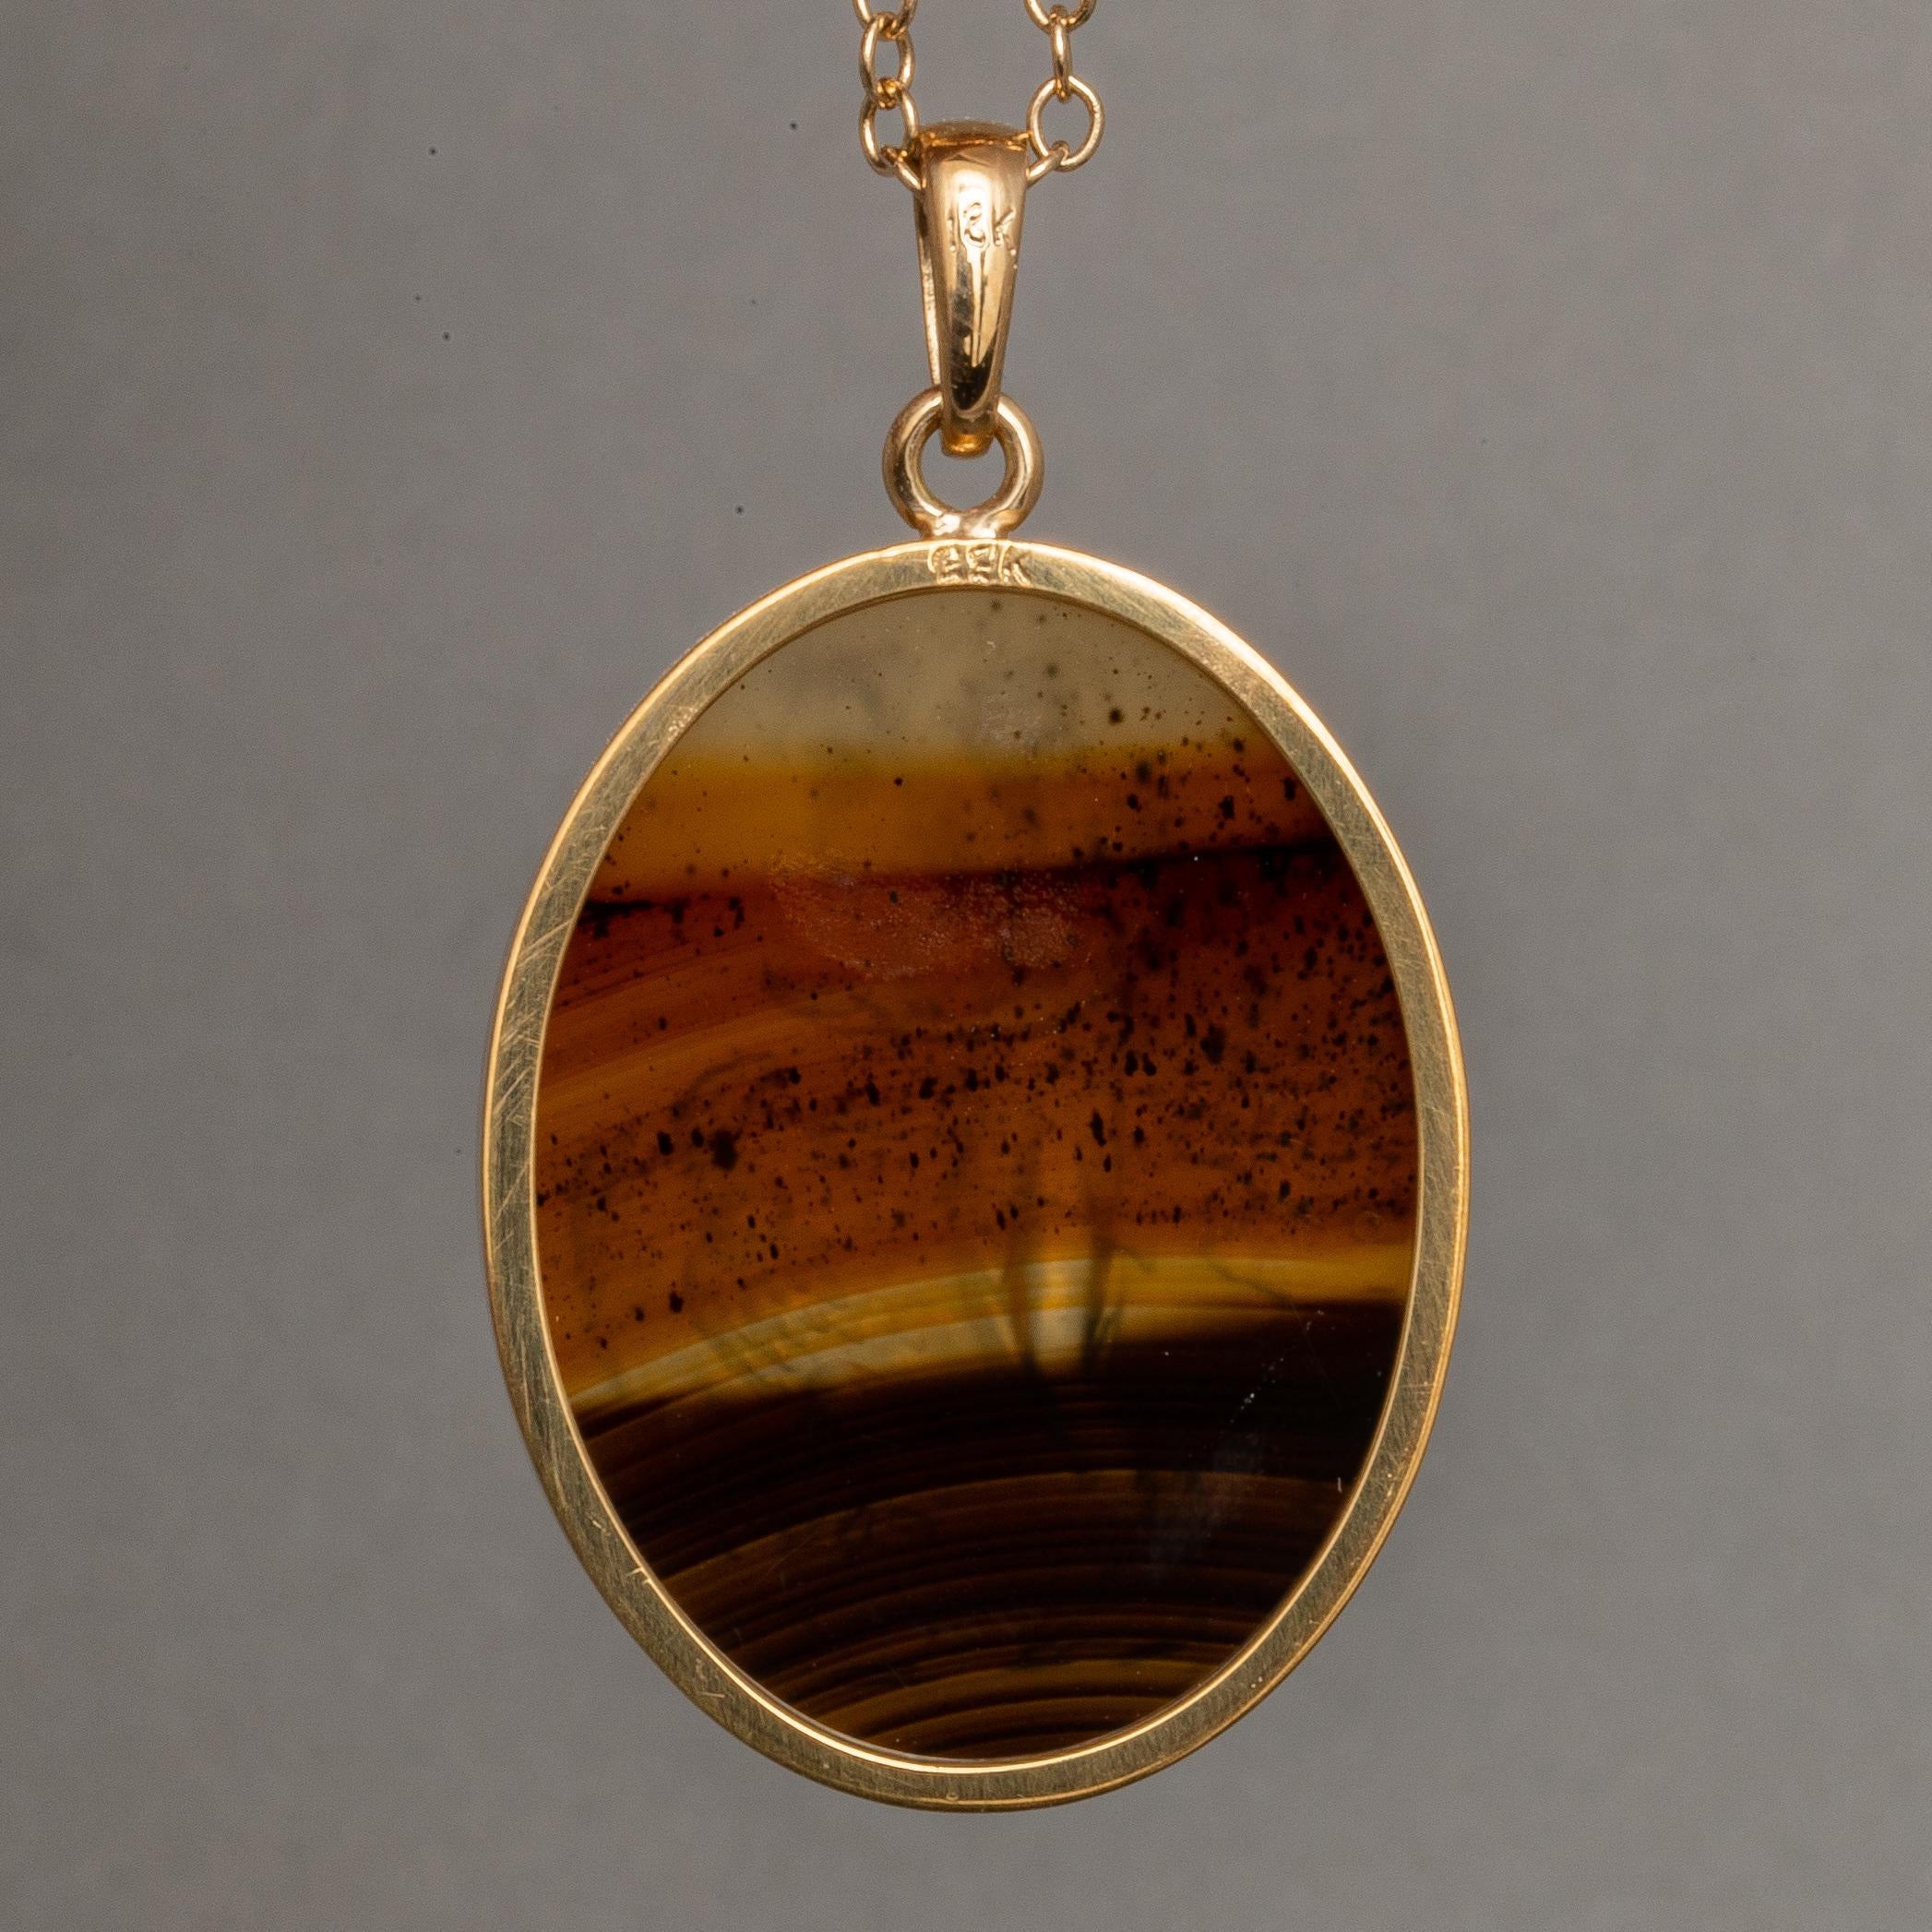 This exquisite intaglio is masterfully engraved onto a Montana agate specimen and features a depiction of Hebe & Zeus. The stone is set in a 18K karat gold pendant. Montana agate is highly prized for its rich color and striking patterns.

Hebe was